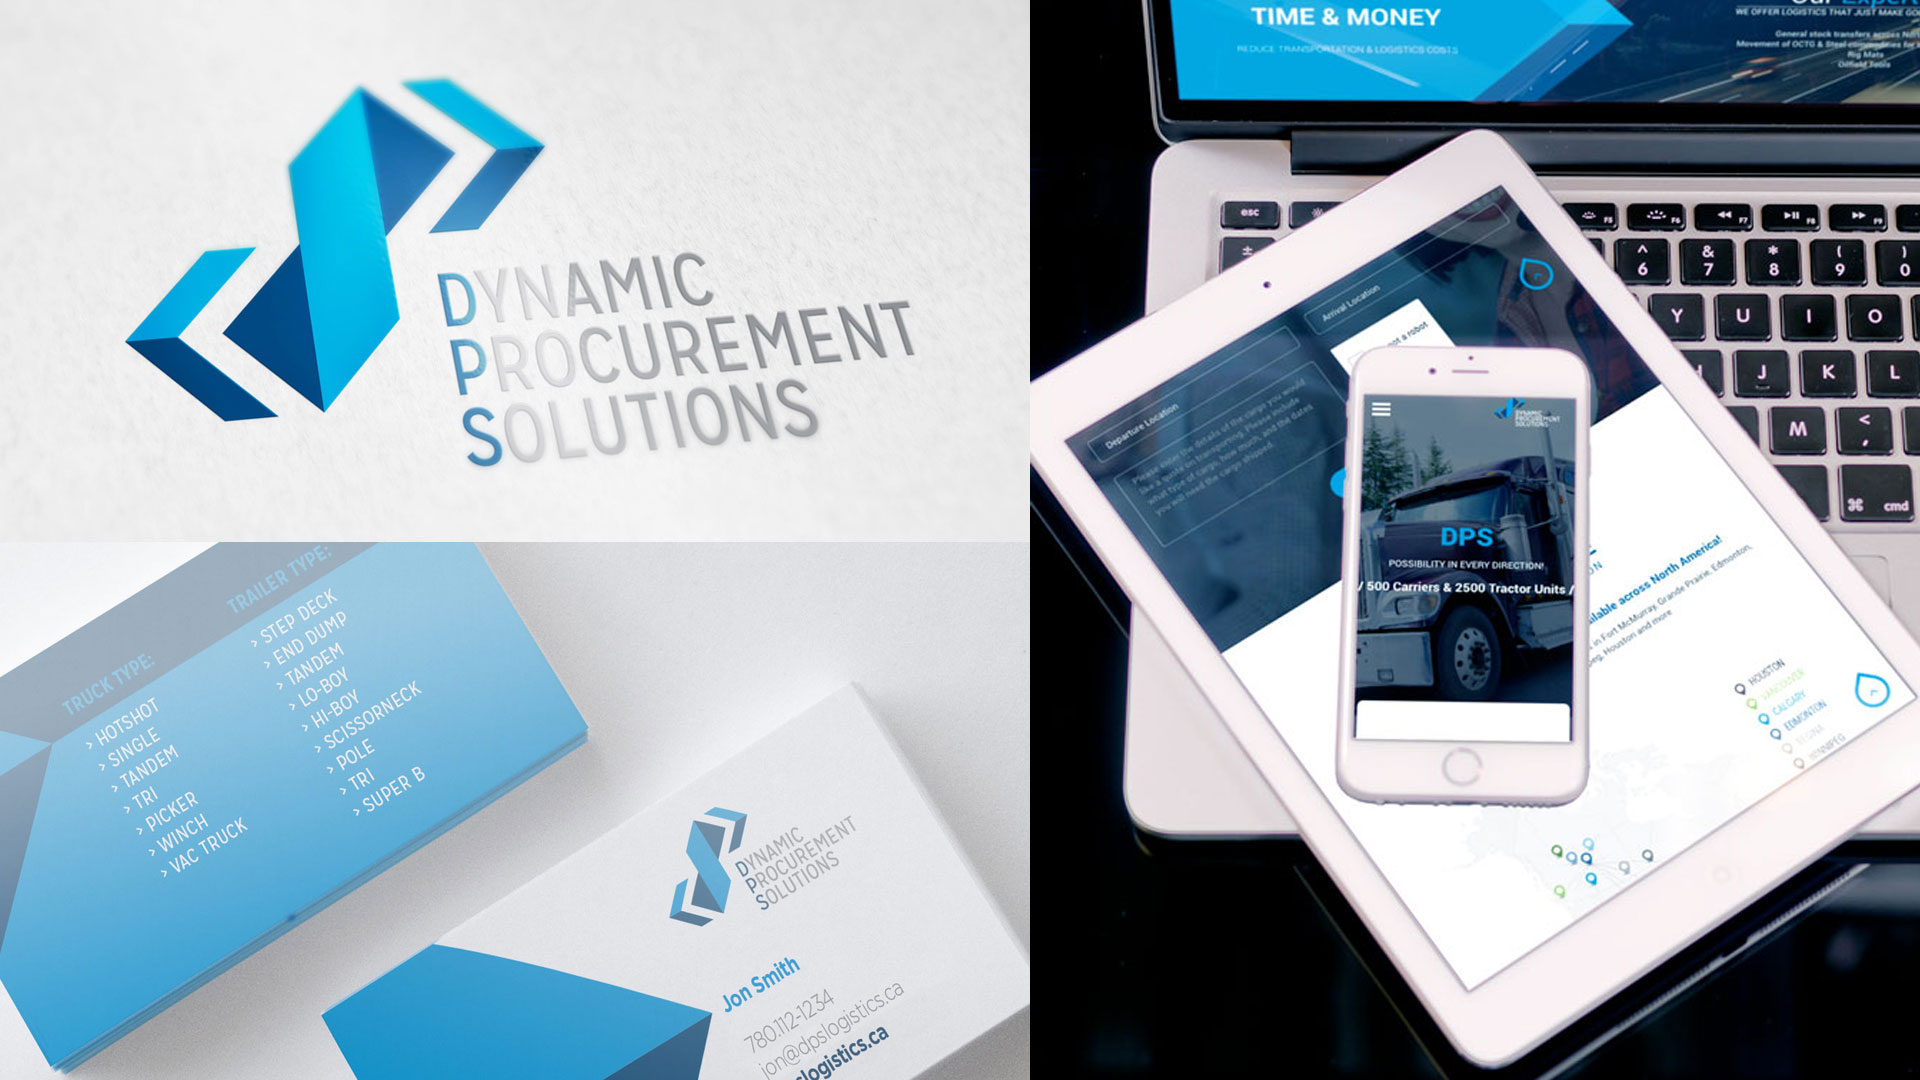 Featured image for “Dynamic Procurement Solutions”